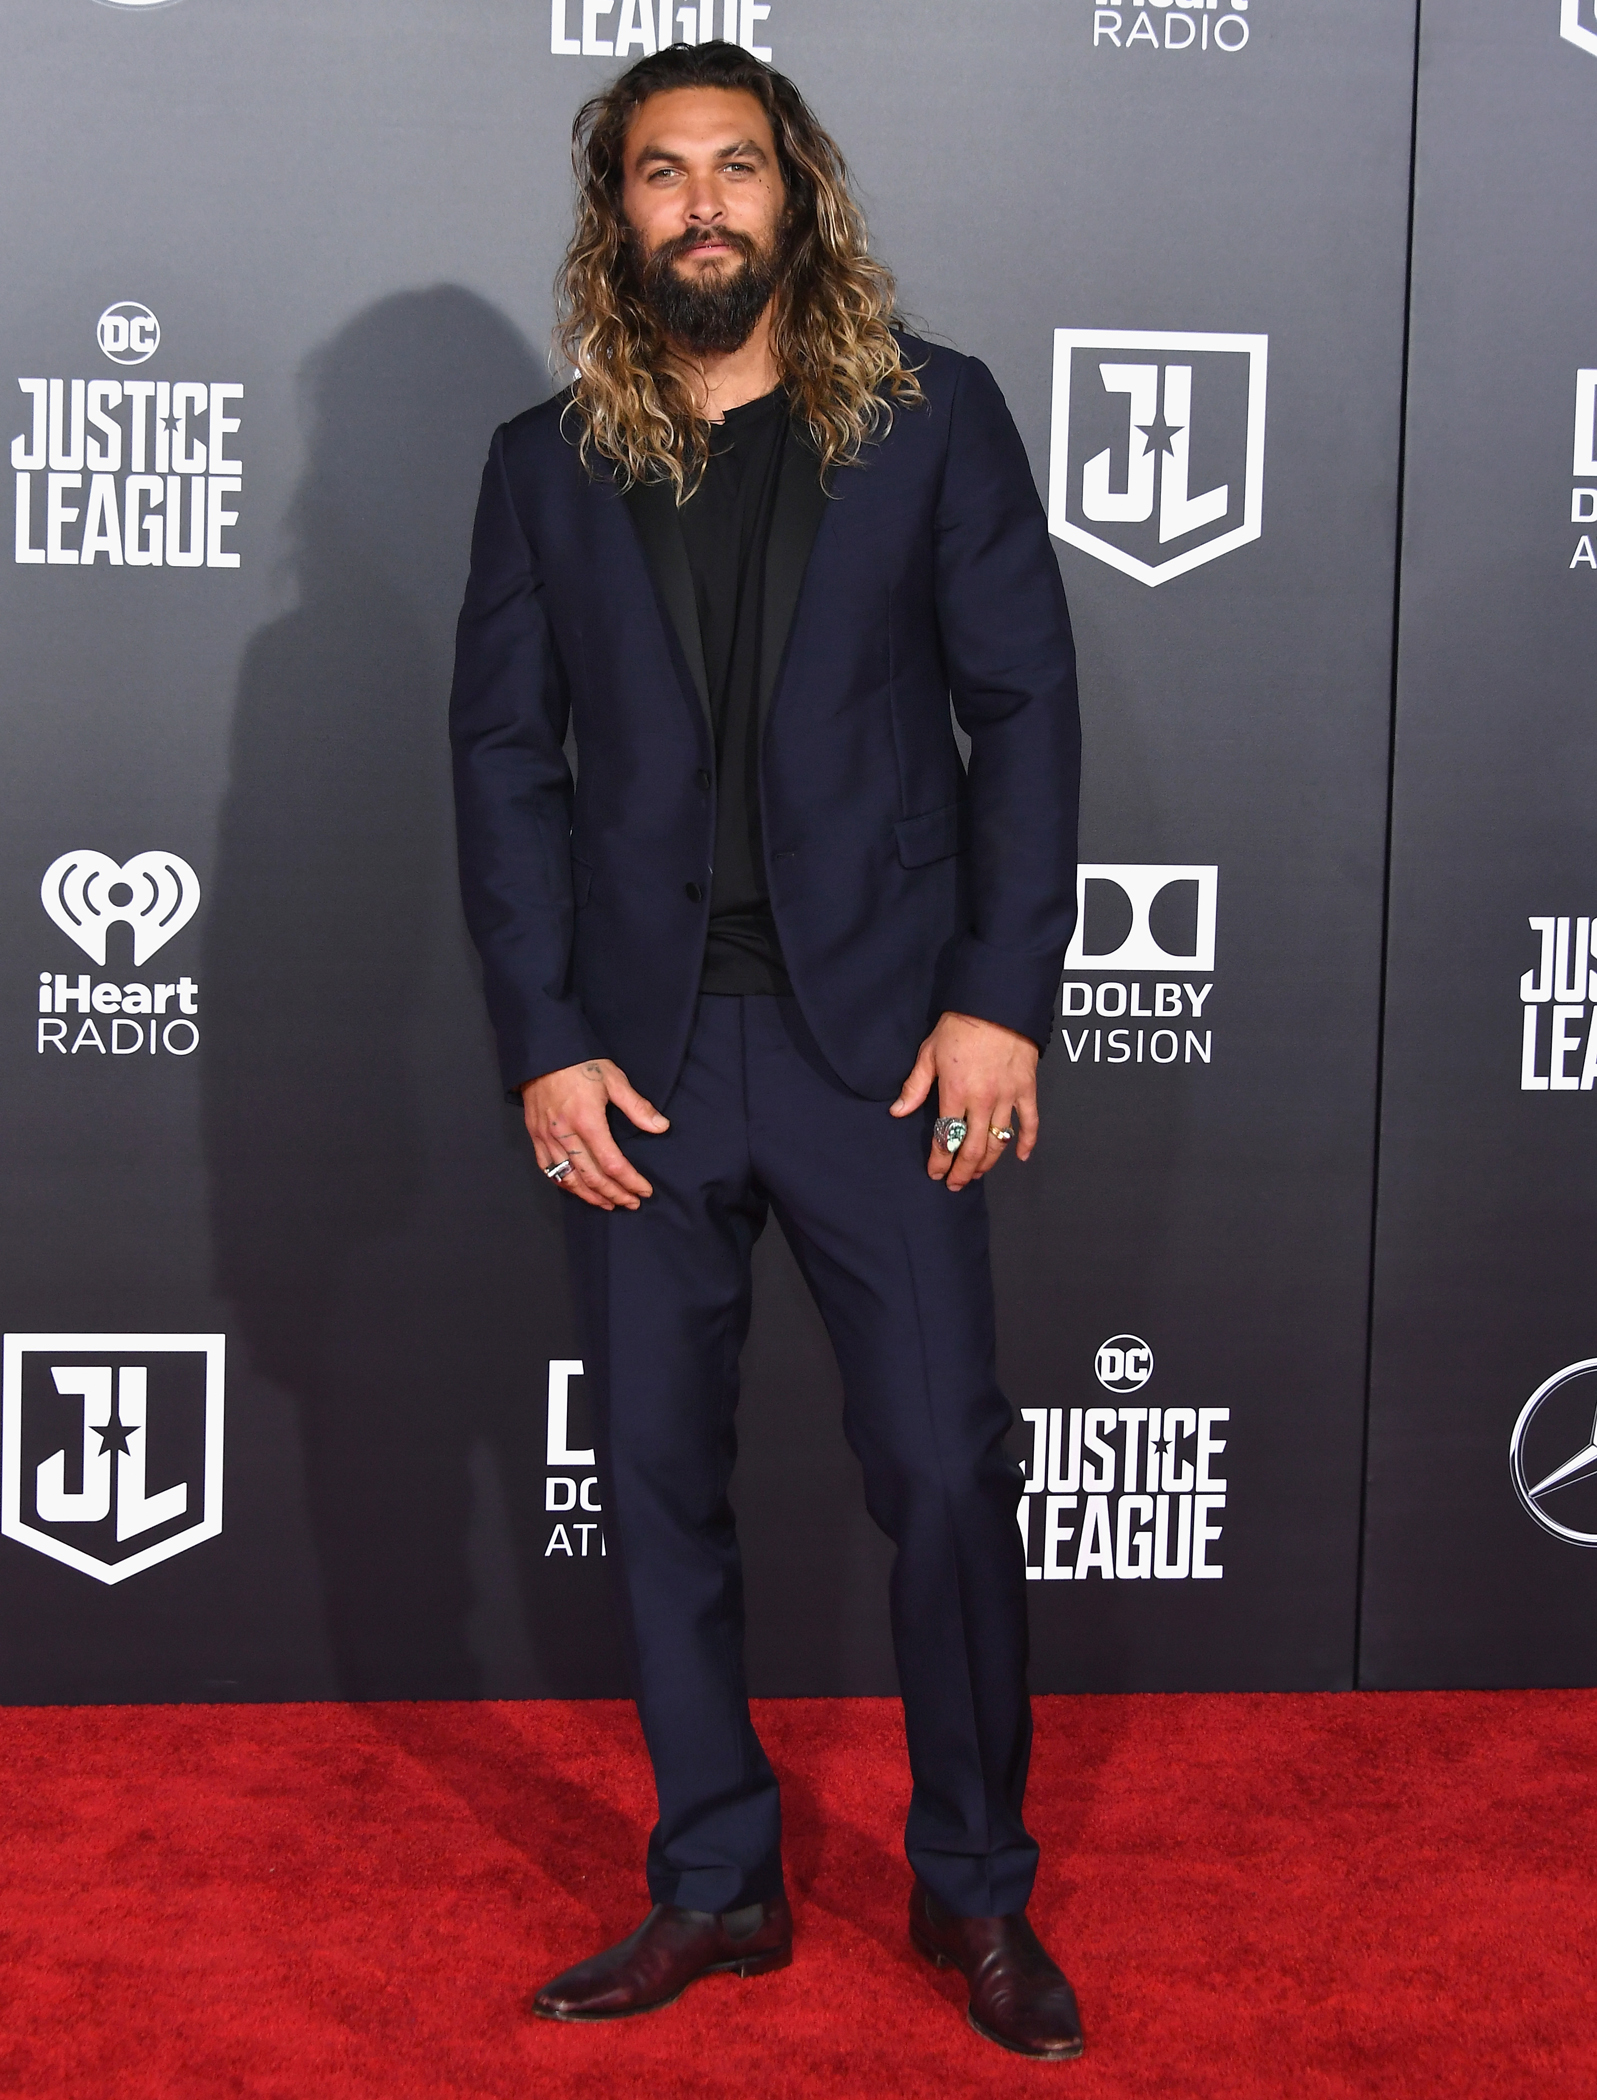 Premiere Of Warner Bros. Pictures' "Justice League" - Arrivals